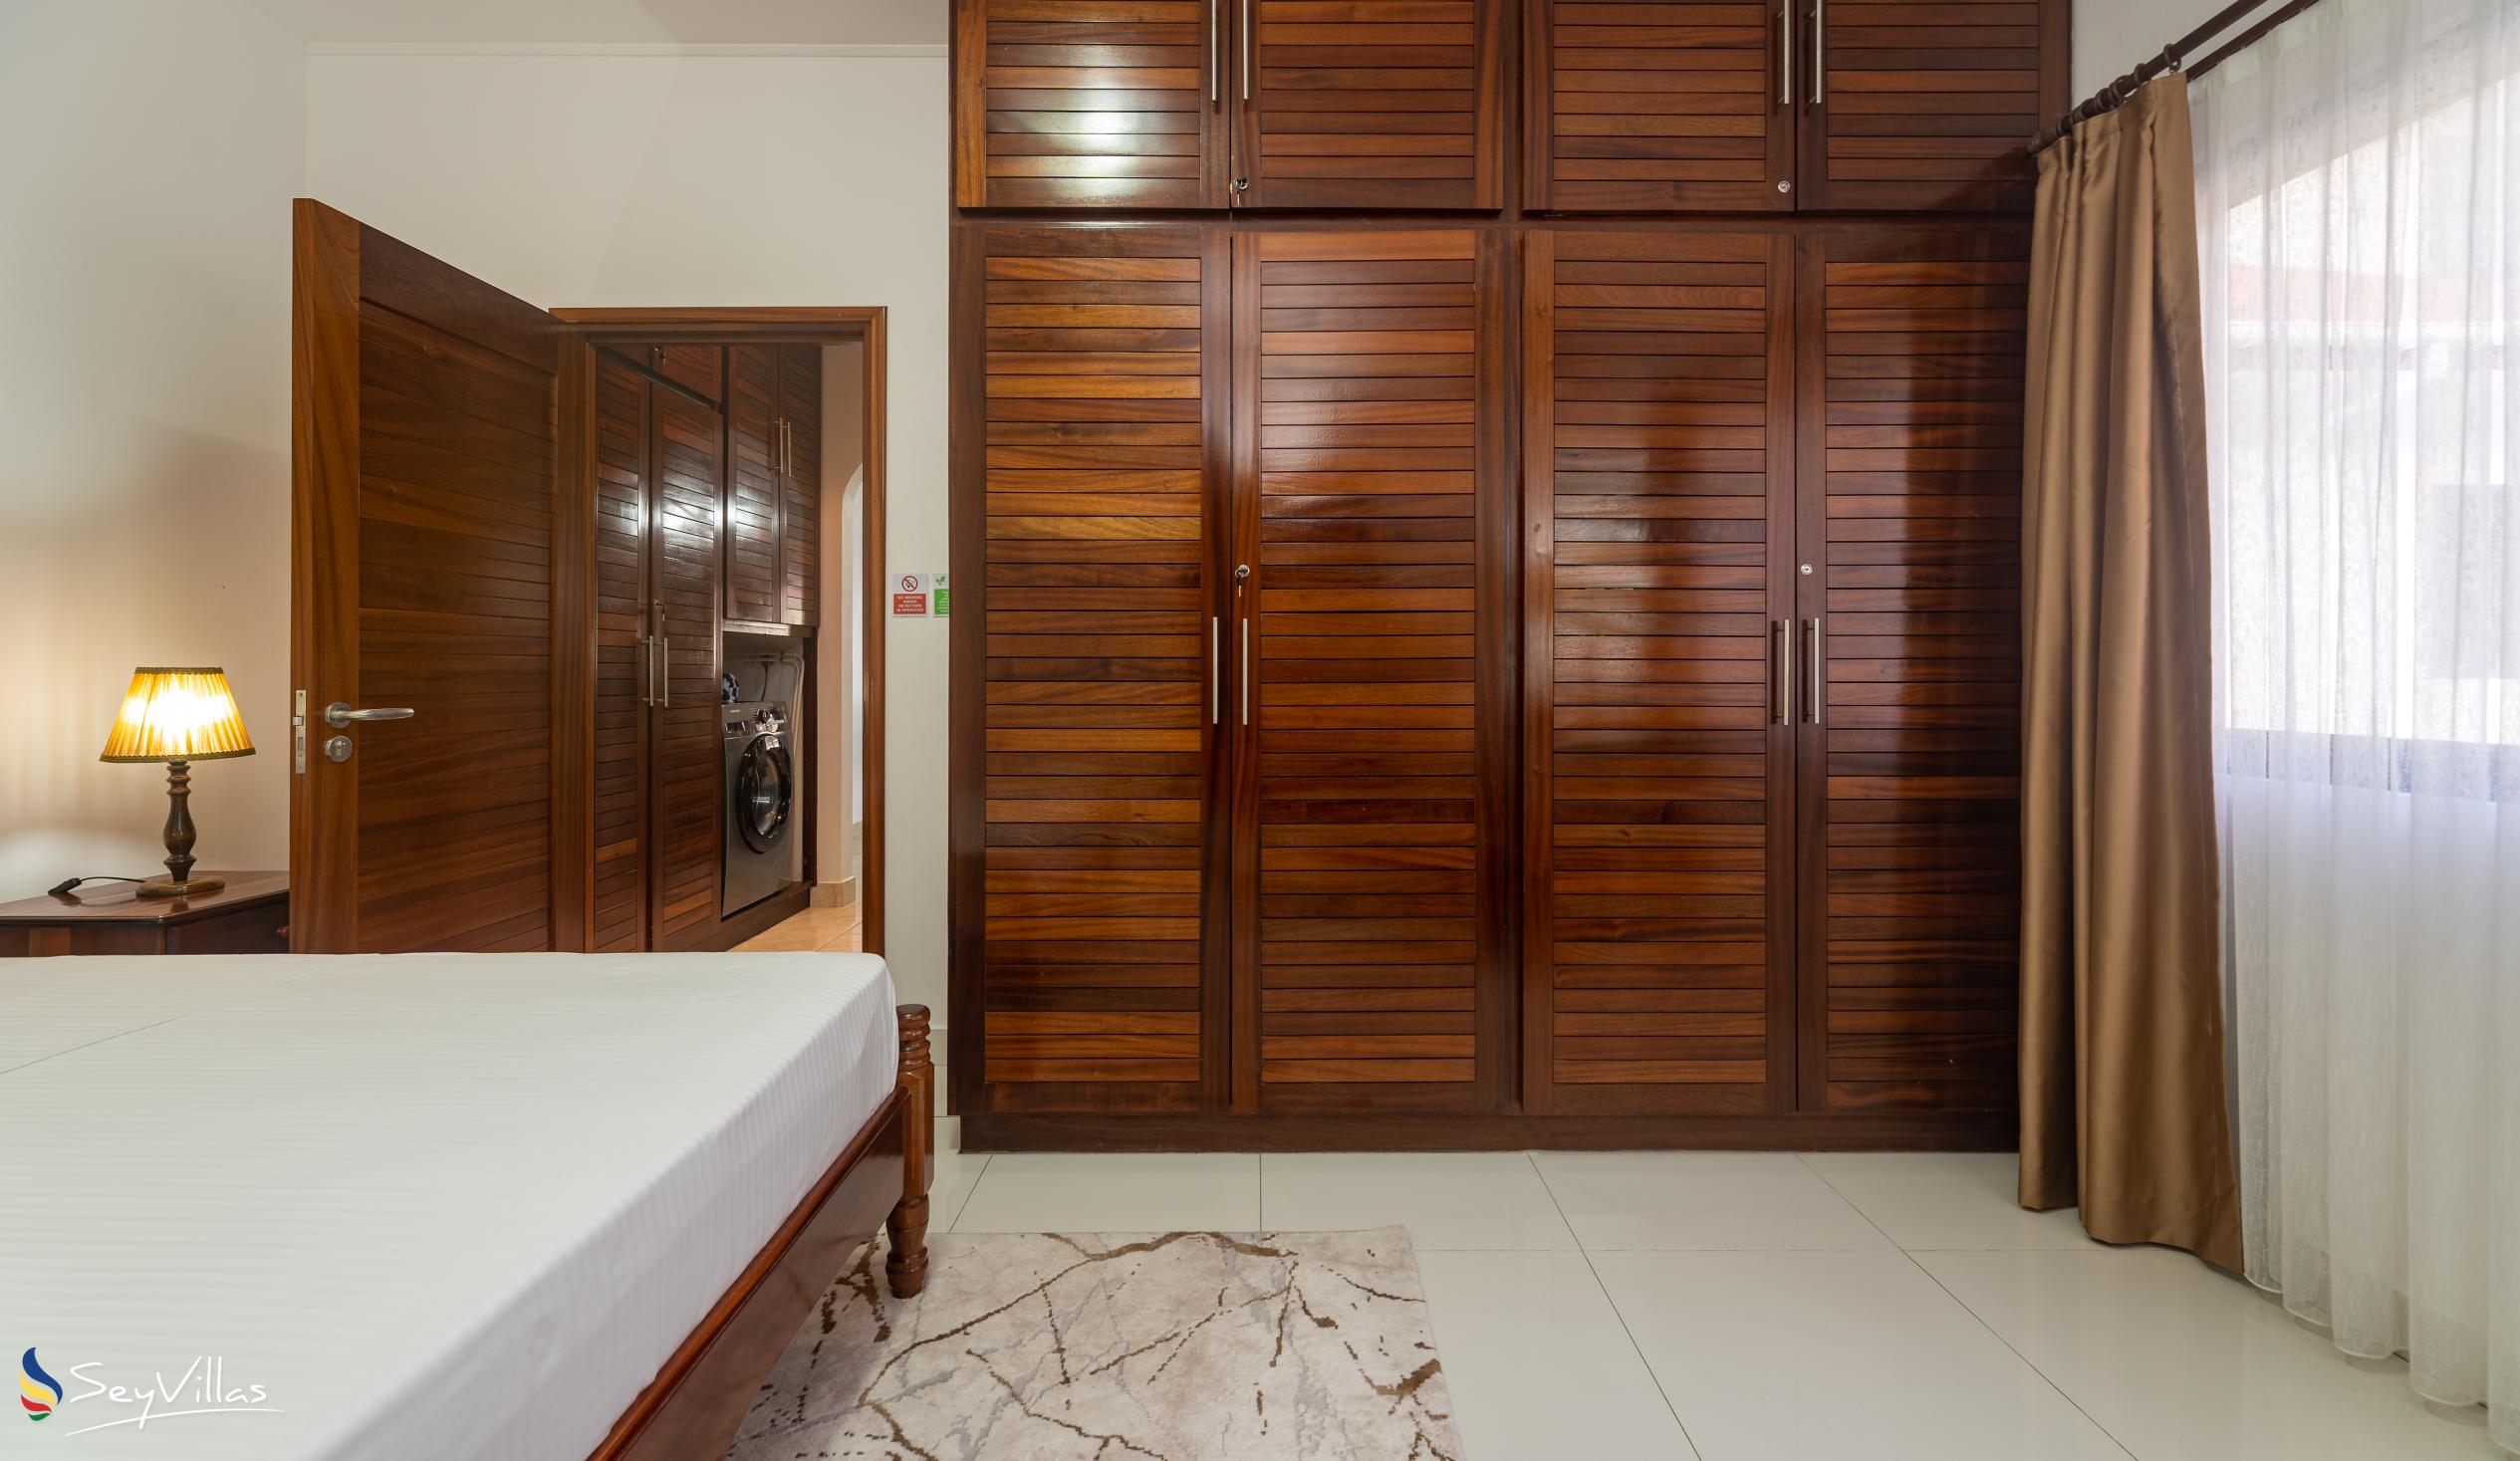 Foto 63: Emma's Guest House and Self-Catering - Villa 1 chambre - Mahé (Seychelles)